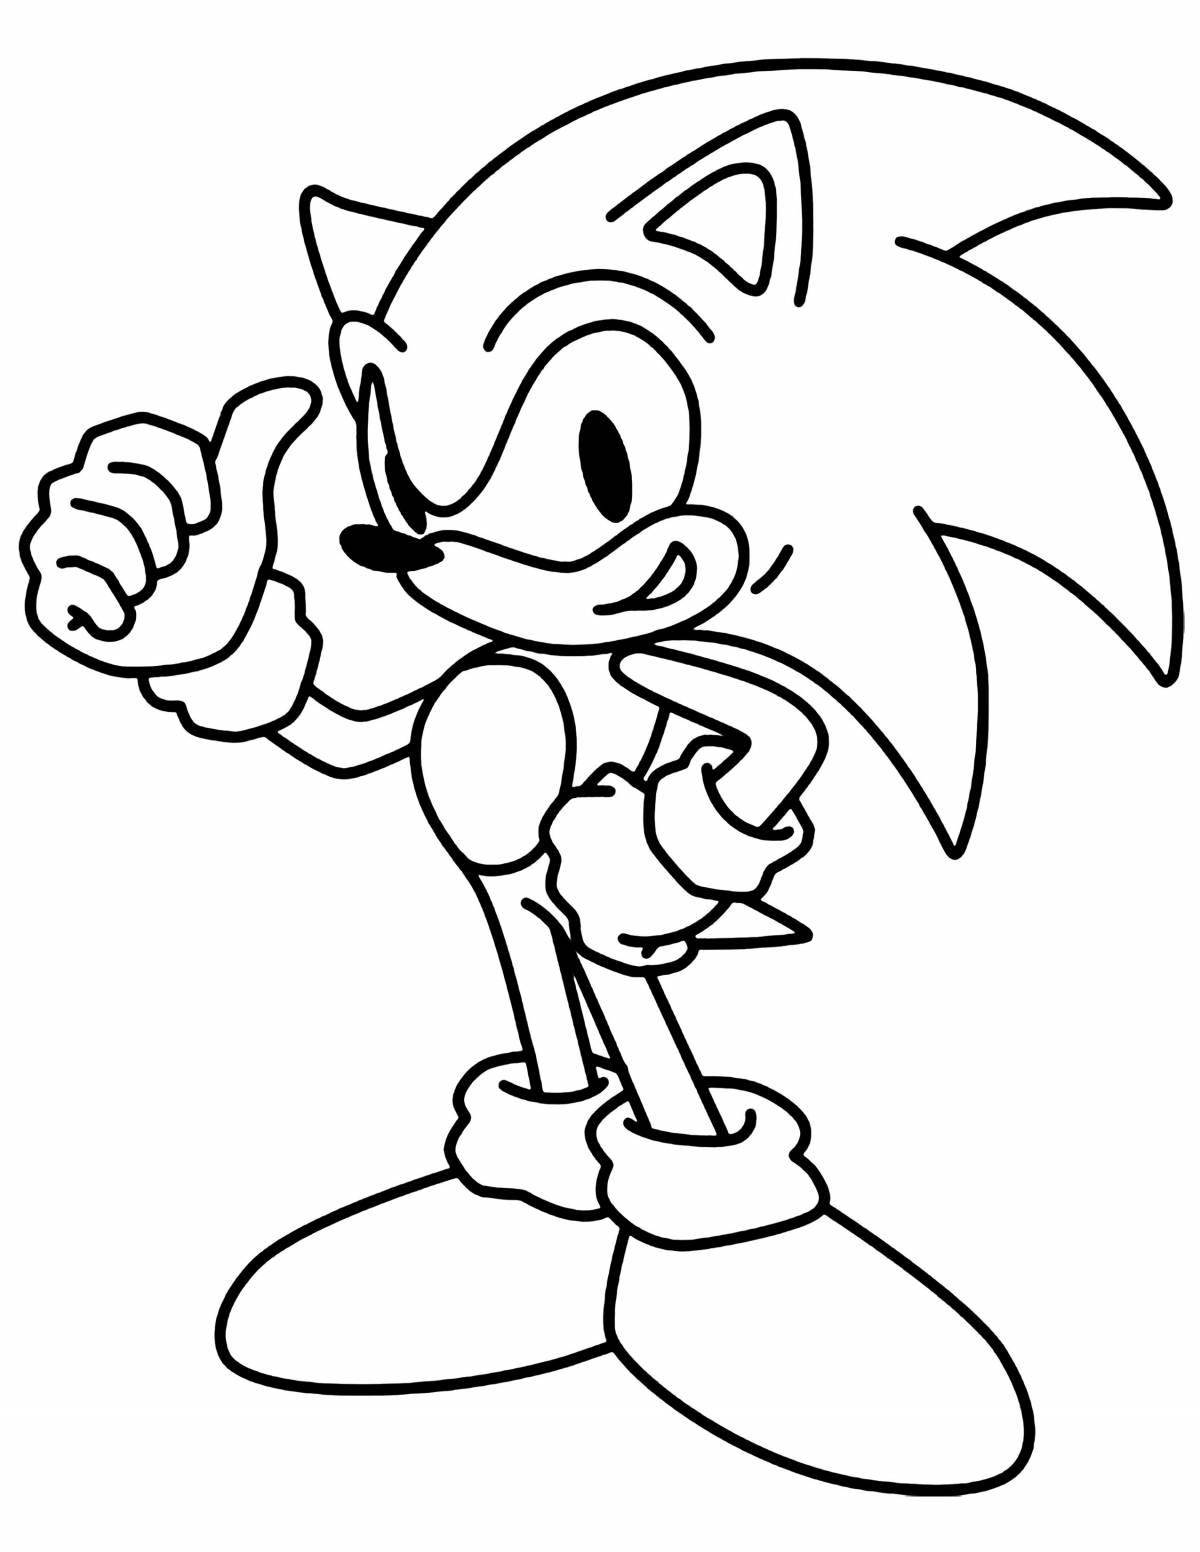 Sonic's awesome blaze coloring book